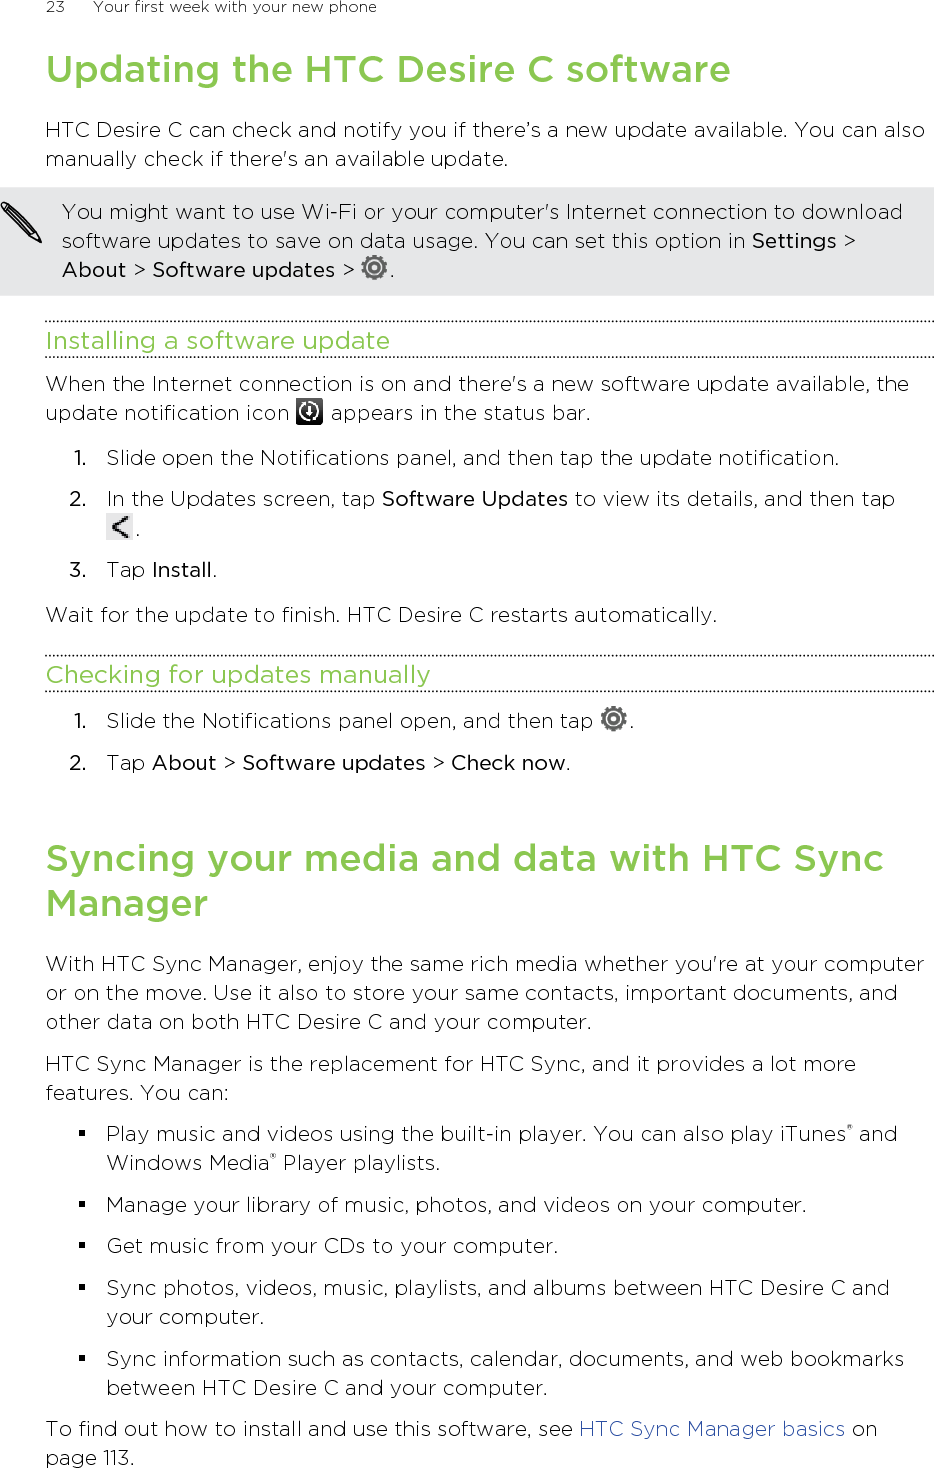 Download and install HTC Sync Manager (when available) from www.htc.com/help.Or in the meantime, download and use the latest version of HTC Sync to sync yourmedia and data.24 Your first week with your new phone